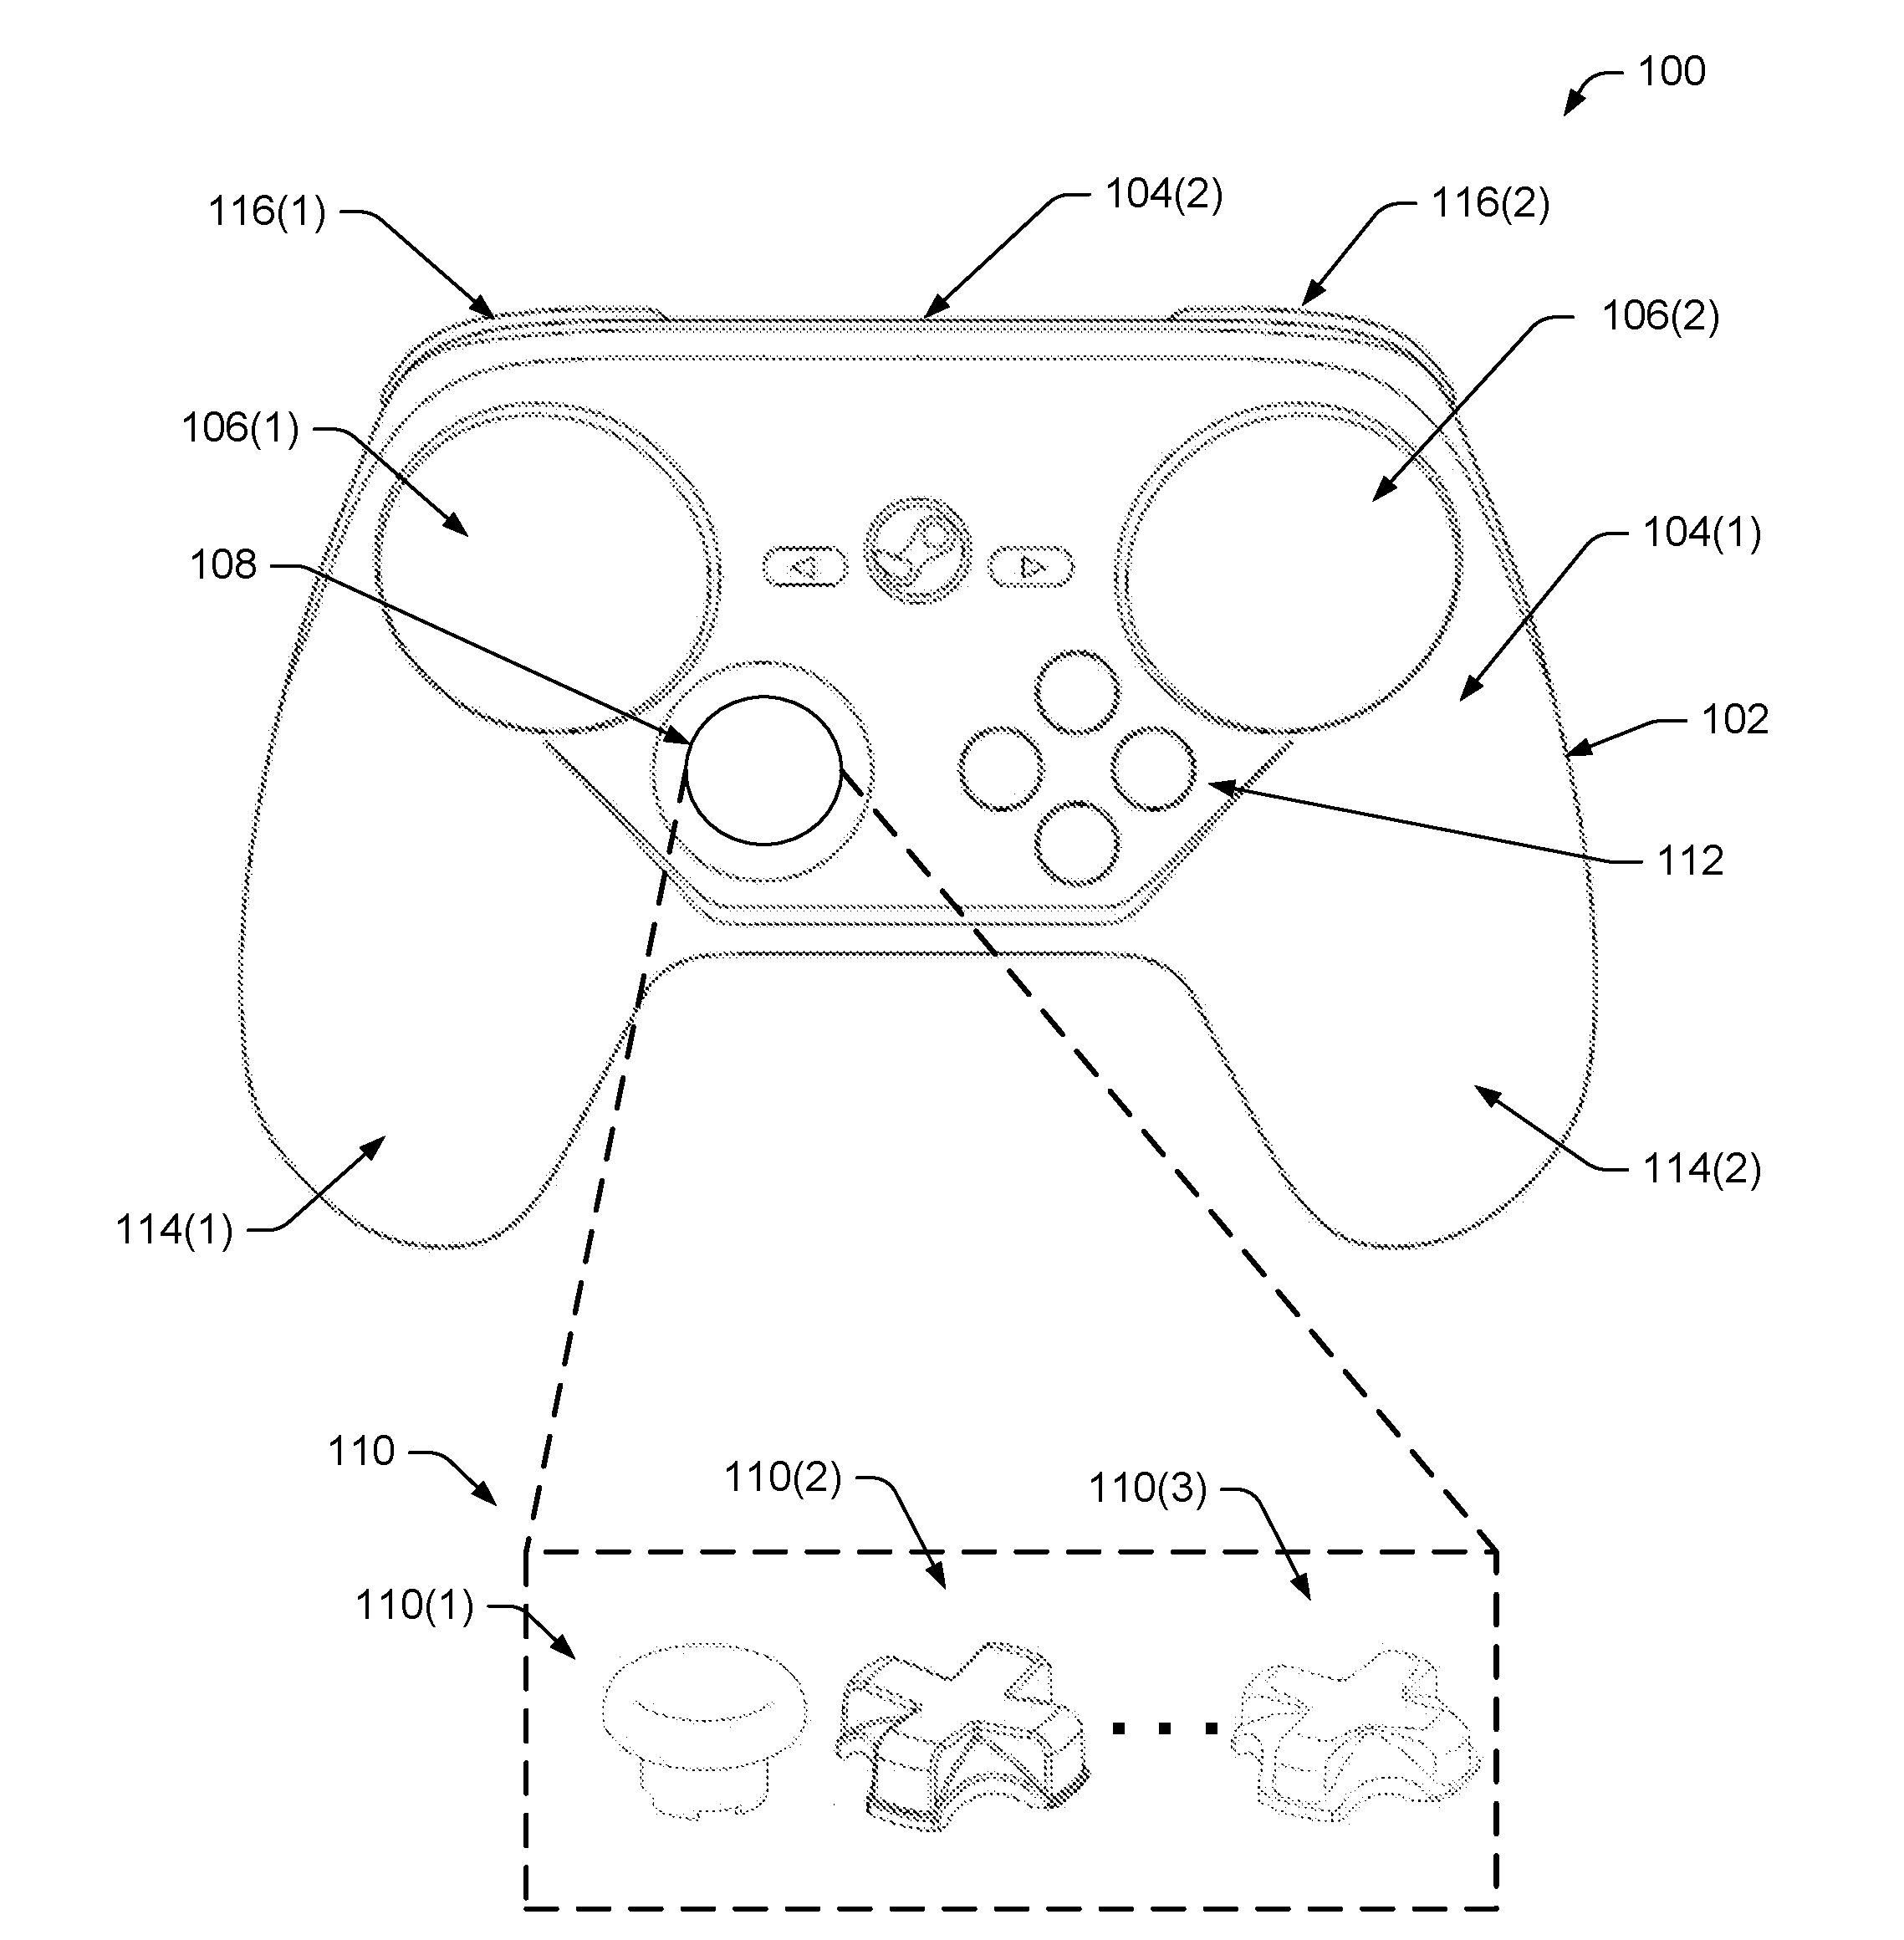 A newly public patent (filed in 2018) from Valve shows a Controller with attachments |